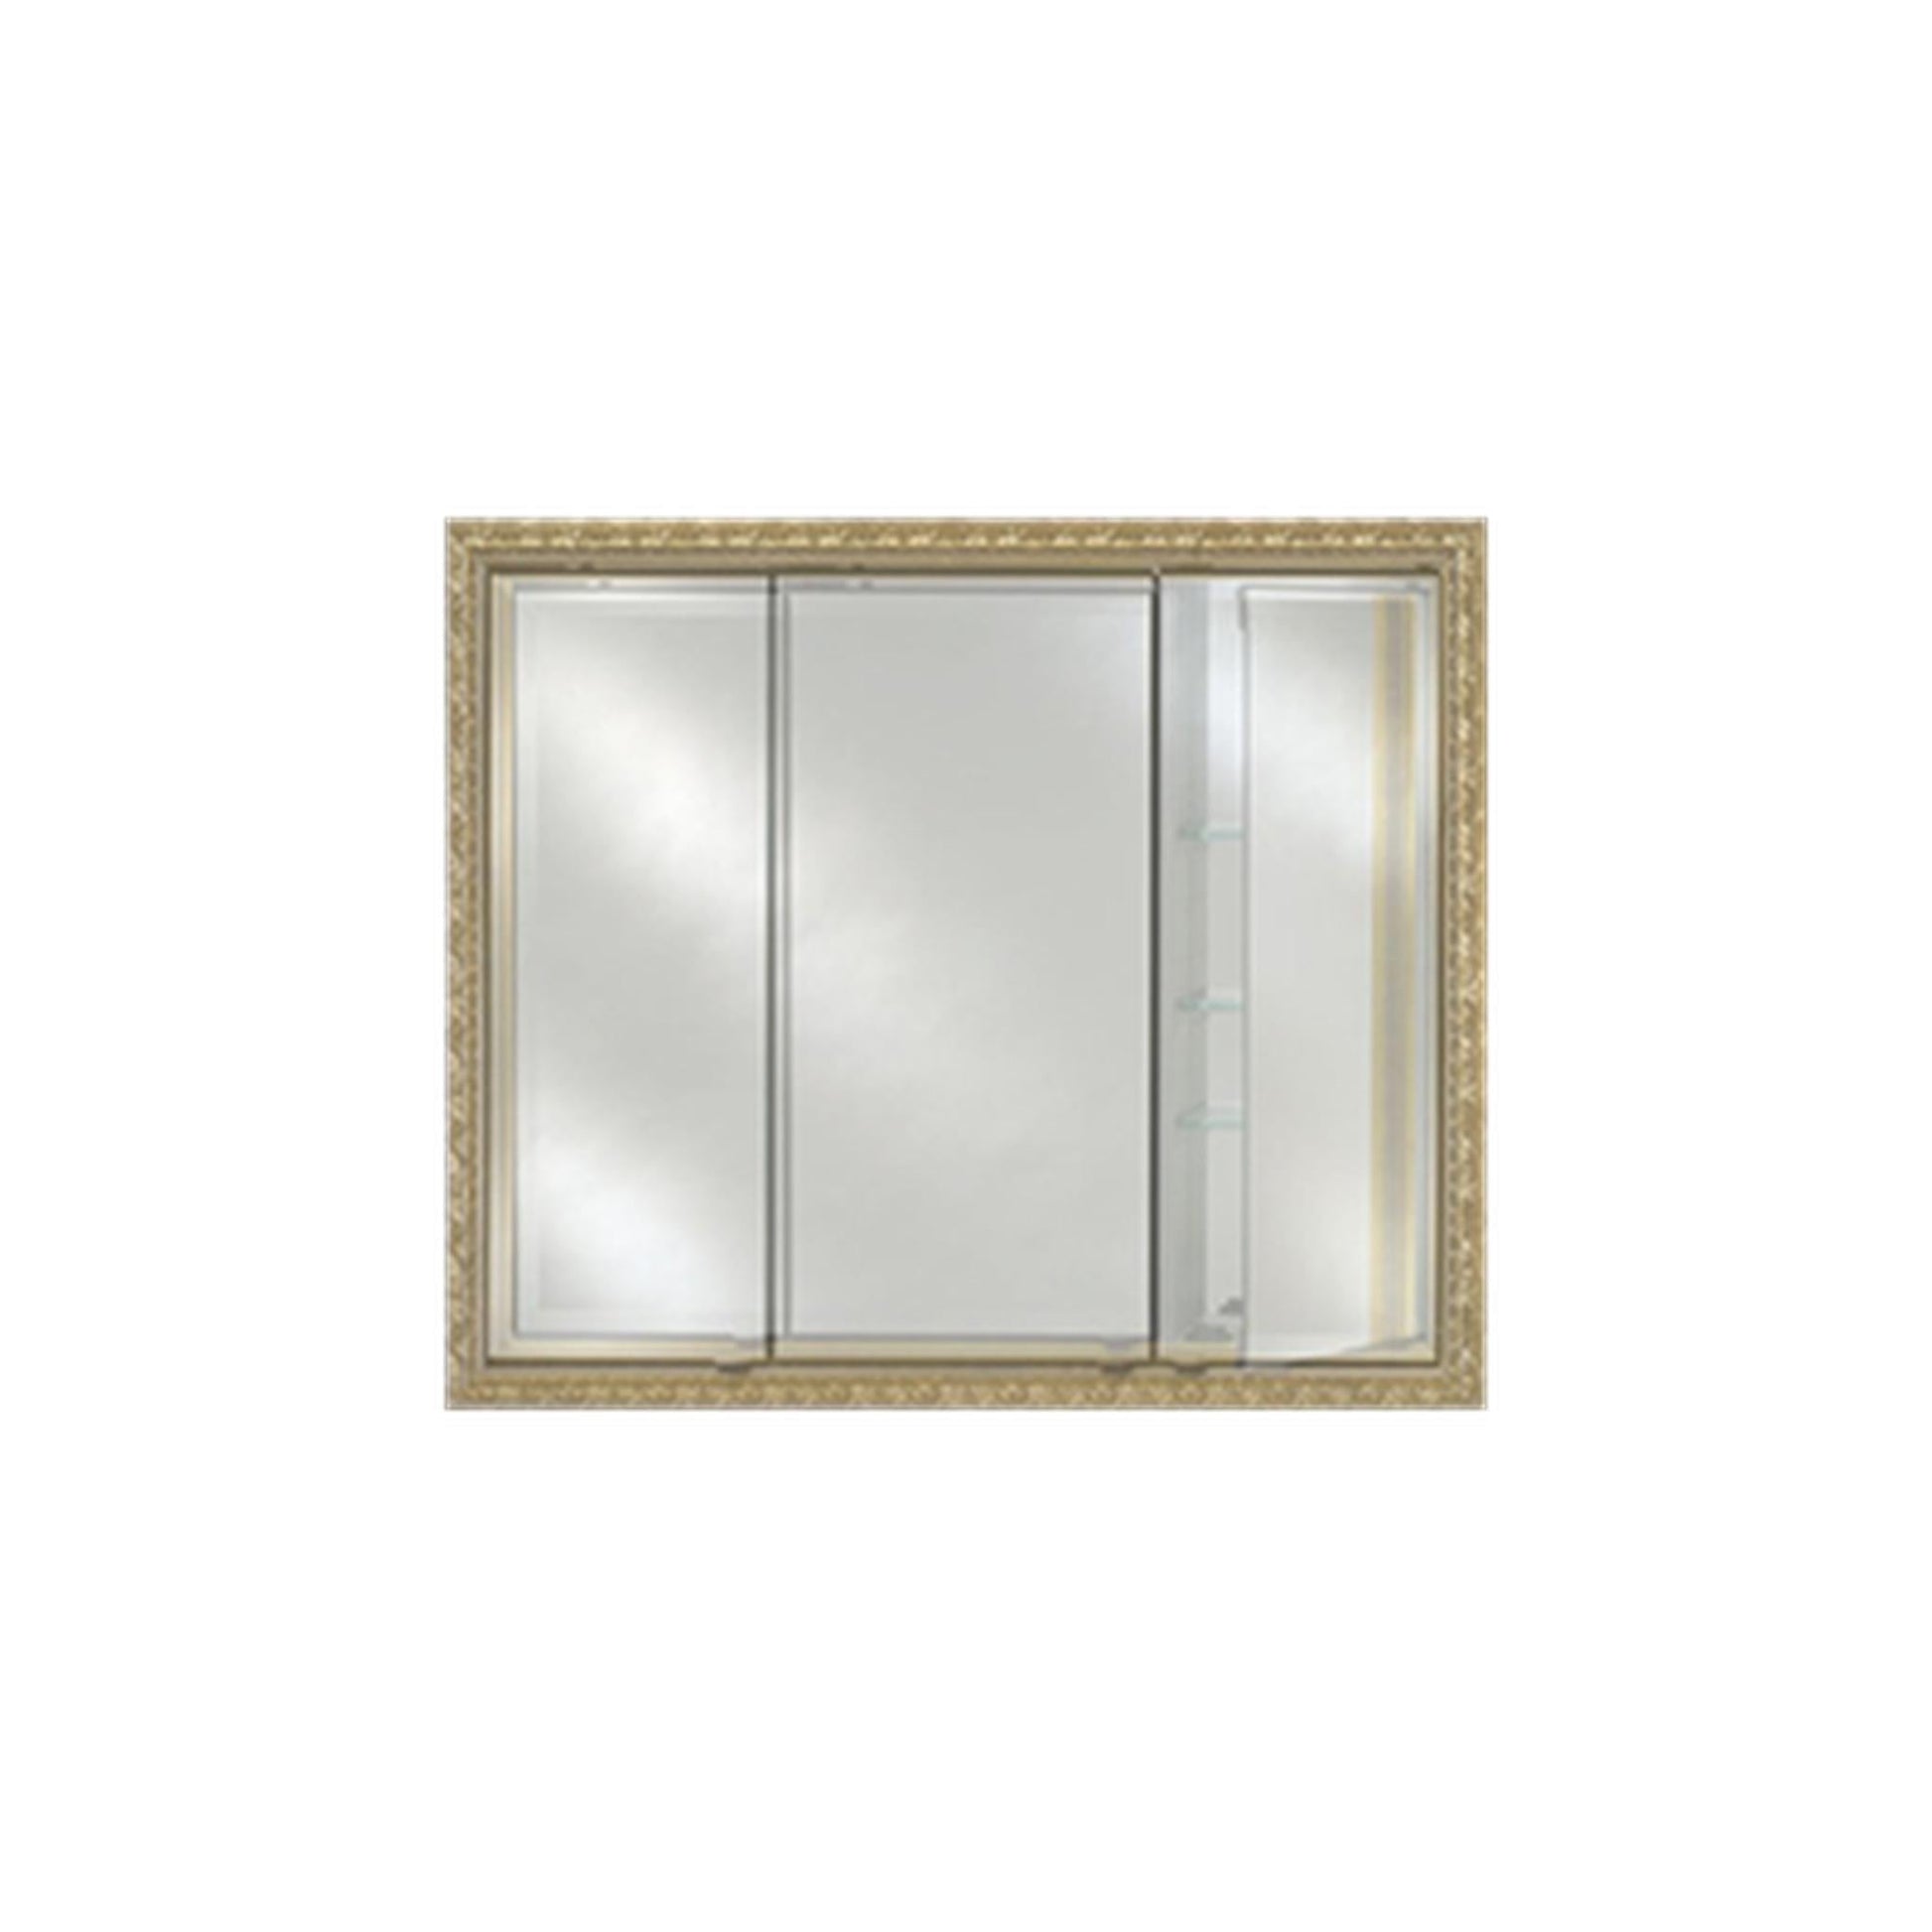 Afina Signature 38" x 30" Polished Glimmer-Flat Recessed Triple Door Medicine Cabinet With Beveled Edge Mirror